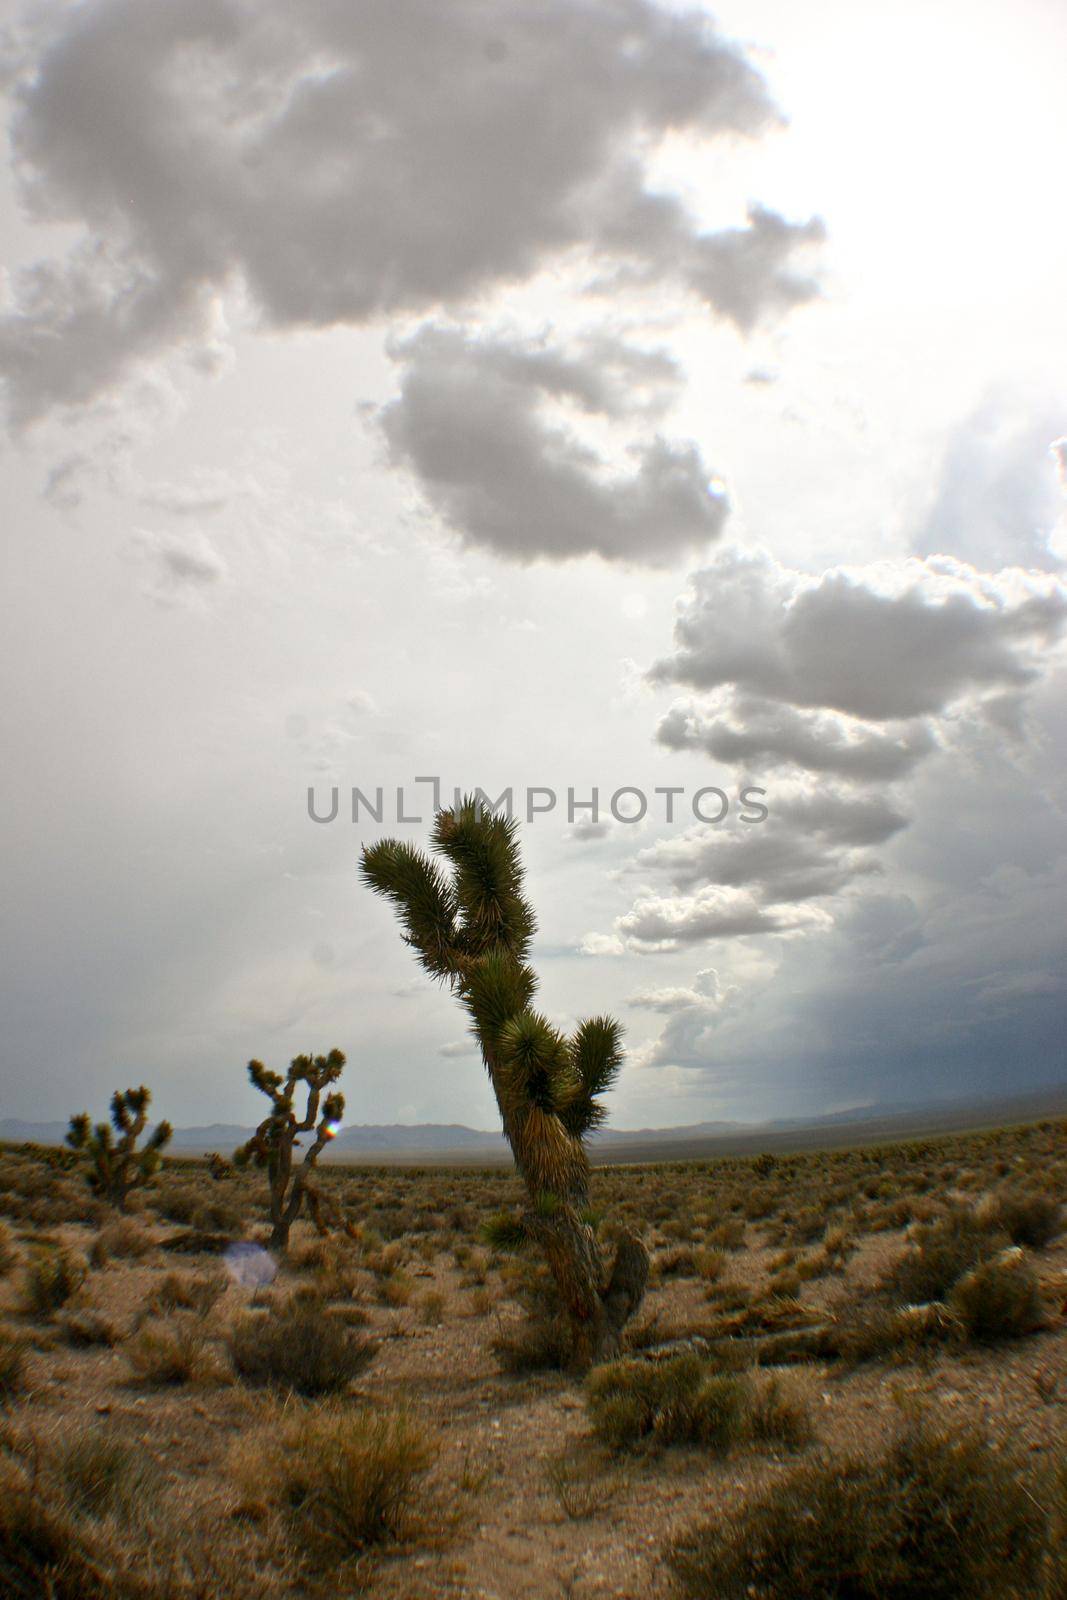 Image of Three large cactuses or cacti surrounded by desert scrub brush with a cloudy and gray sky